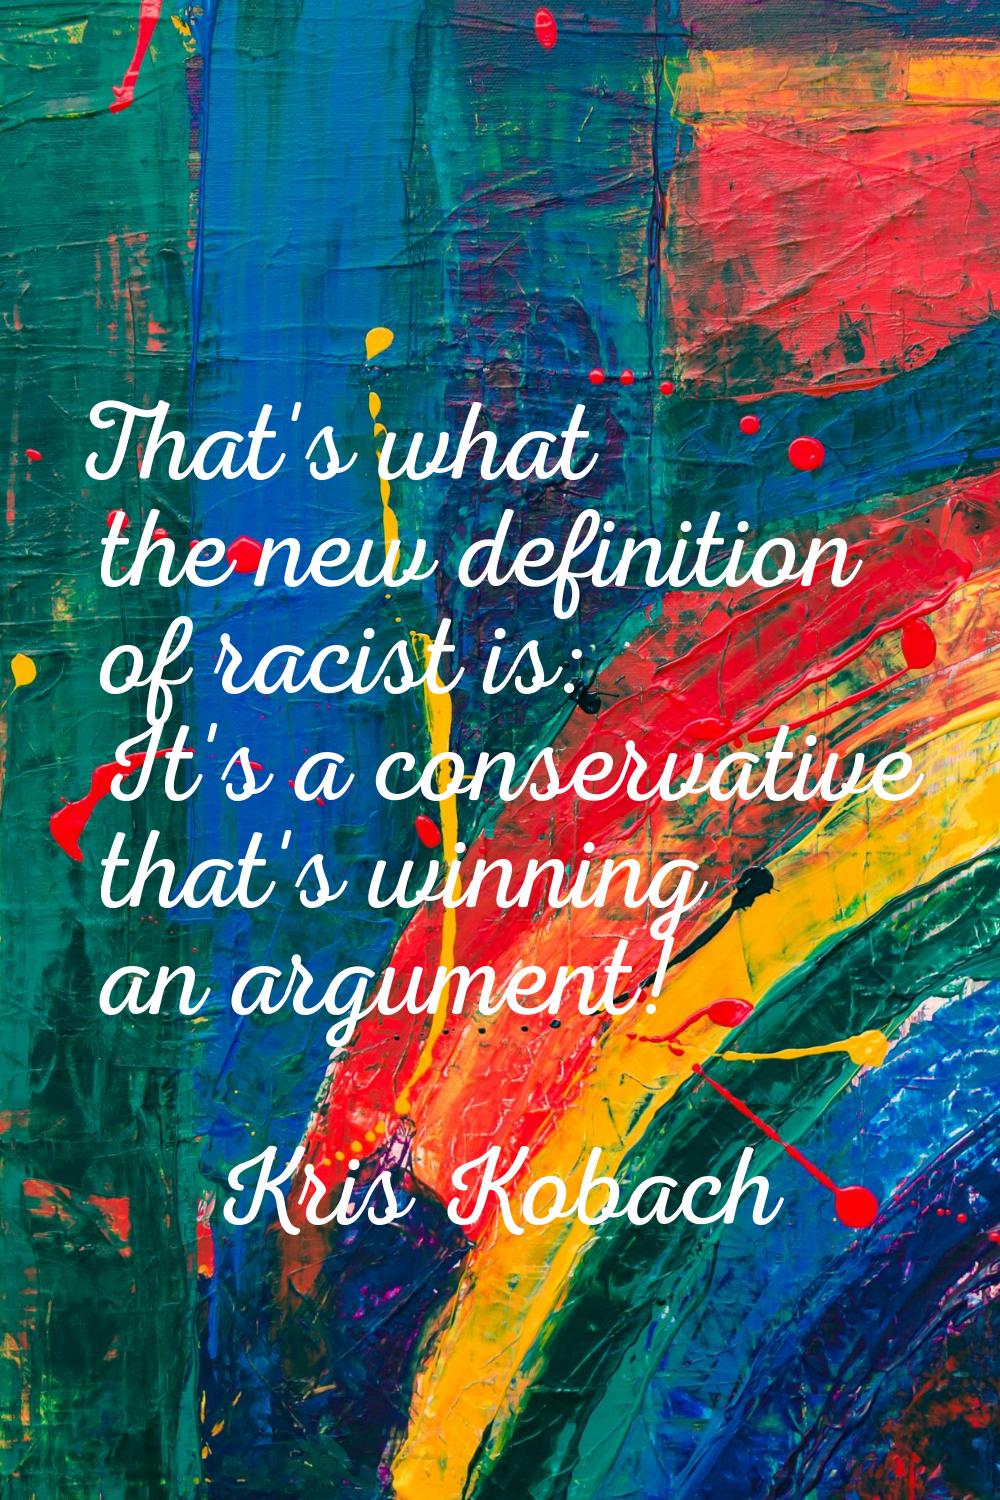 That's what the new definition of racist is: It's a conservative that's winning an argument!